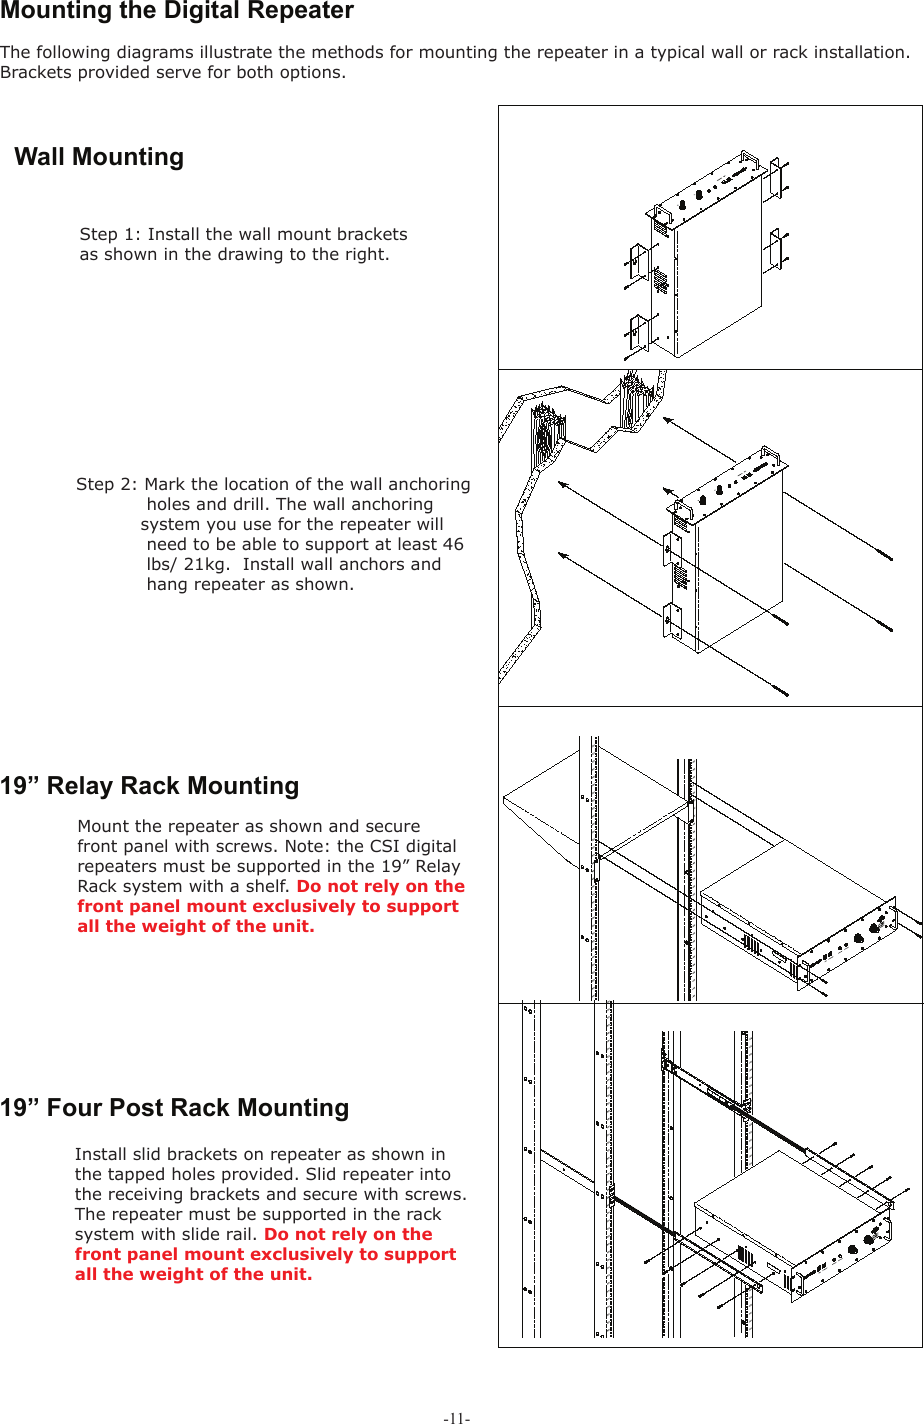 -11- Mounting the Digital RepeaterThe following diagrams illustrate the methods for mounting the repeater in a typical wall or rack installation.  Brackets provided serve for both options.Step 2: Mark the location of the wall anchoring            holes and drill. The wall anchoring            system you use for the repeater will            need to be able to support at least 46             lbs/ 21kg.  Install wall anchors and             hang repeater as shown.Step 1: Install the wall mount brackets as shown in the drawing to the right. Wall Mounting 19” Relay Rack Mounting Mount the repeater as shown and secure front panel with screws. Note: the CSI digital repeaters must be supported in the 19” Relay Rack system with a shelf. Do not rely on the front panel mount exclusively to support all the weight of the unit.Install slid brackets on repeater as shown in the tapped holes provided. Slid repeater into the receiving brackets and secure with screws. The repeater must be supported in the rack system with slide rail. Do not rely on the front panel mount exclusively to support all the weight of the unit.19” Four Post Rack Mounting 